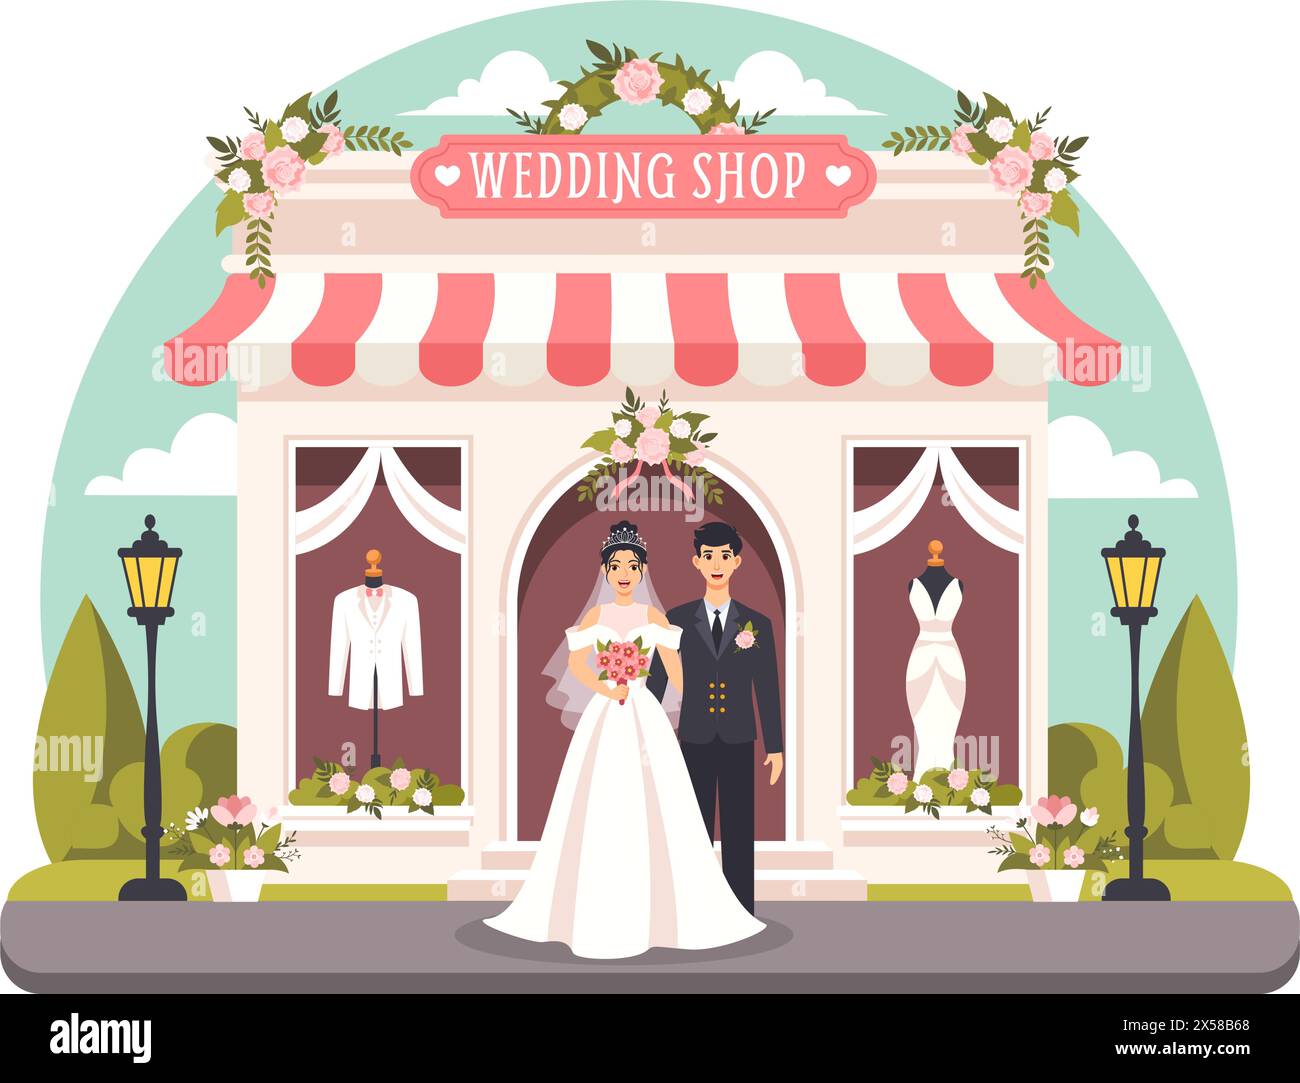 Wedding Shop Vector Illustration with Lover Looking for Jewellery, Beautiful Bride Gowns and Accessories to Get Married in Flat Cartoon Background Stock Vector